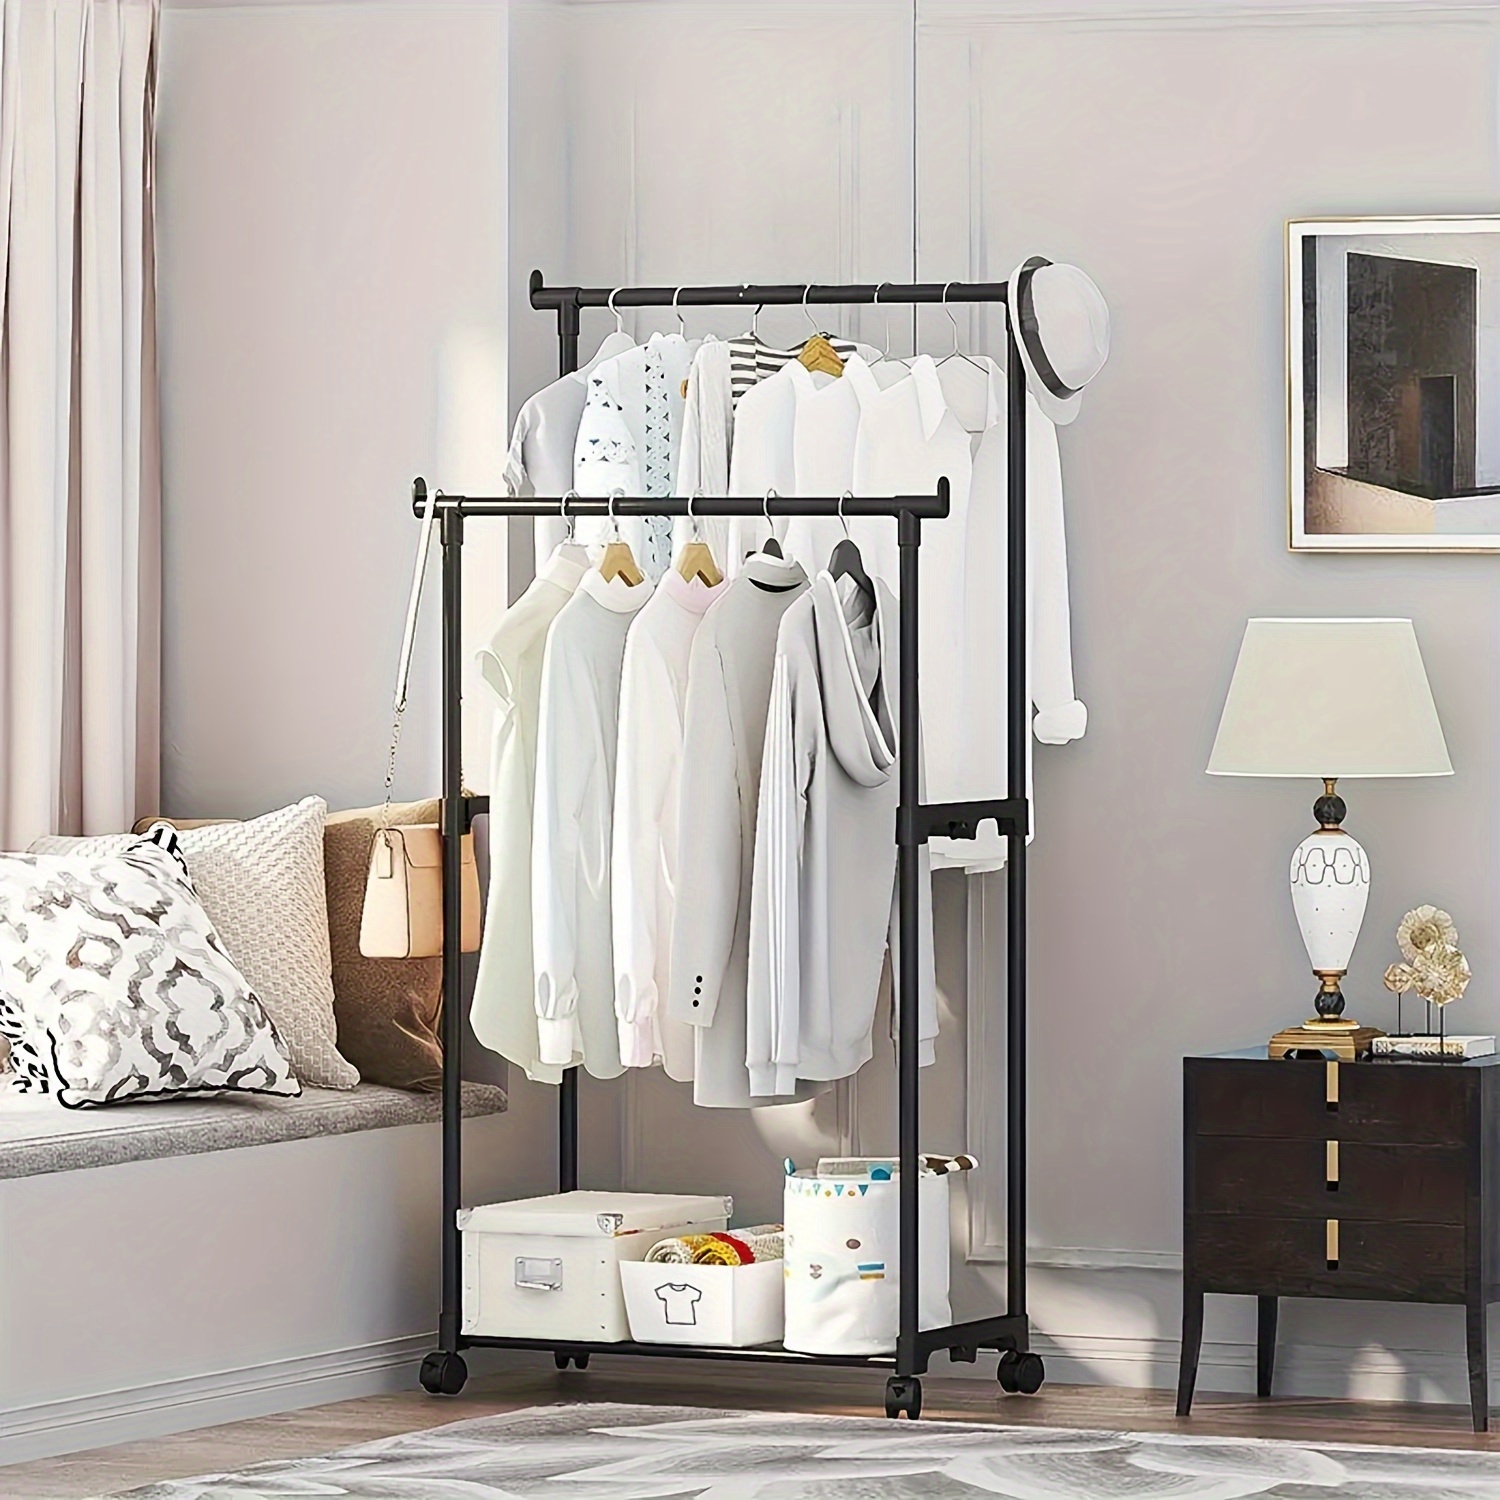 

All-in-one Clothes Drying Solution - Freestanding Steel Rack With Wheels For Easy Movement